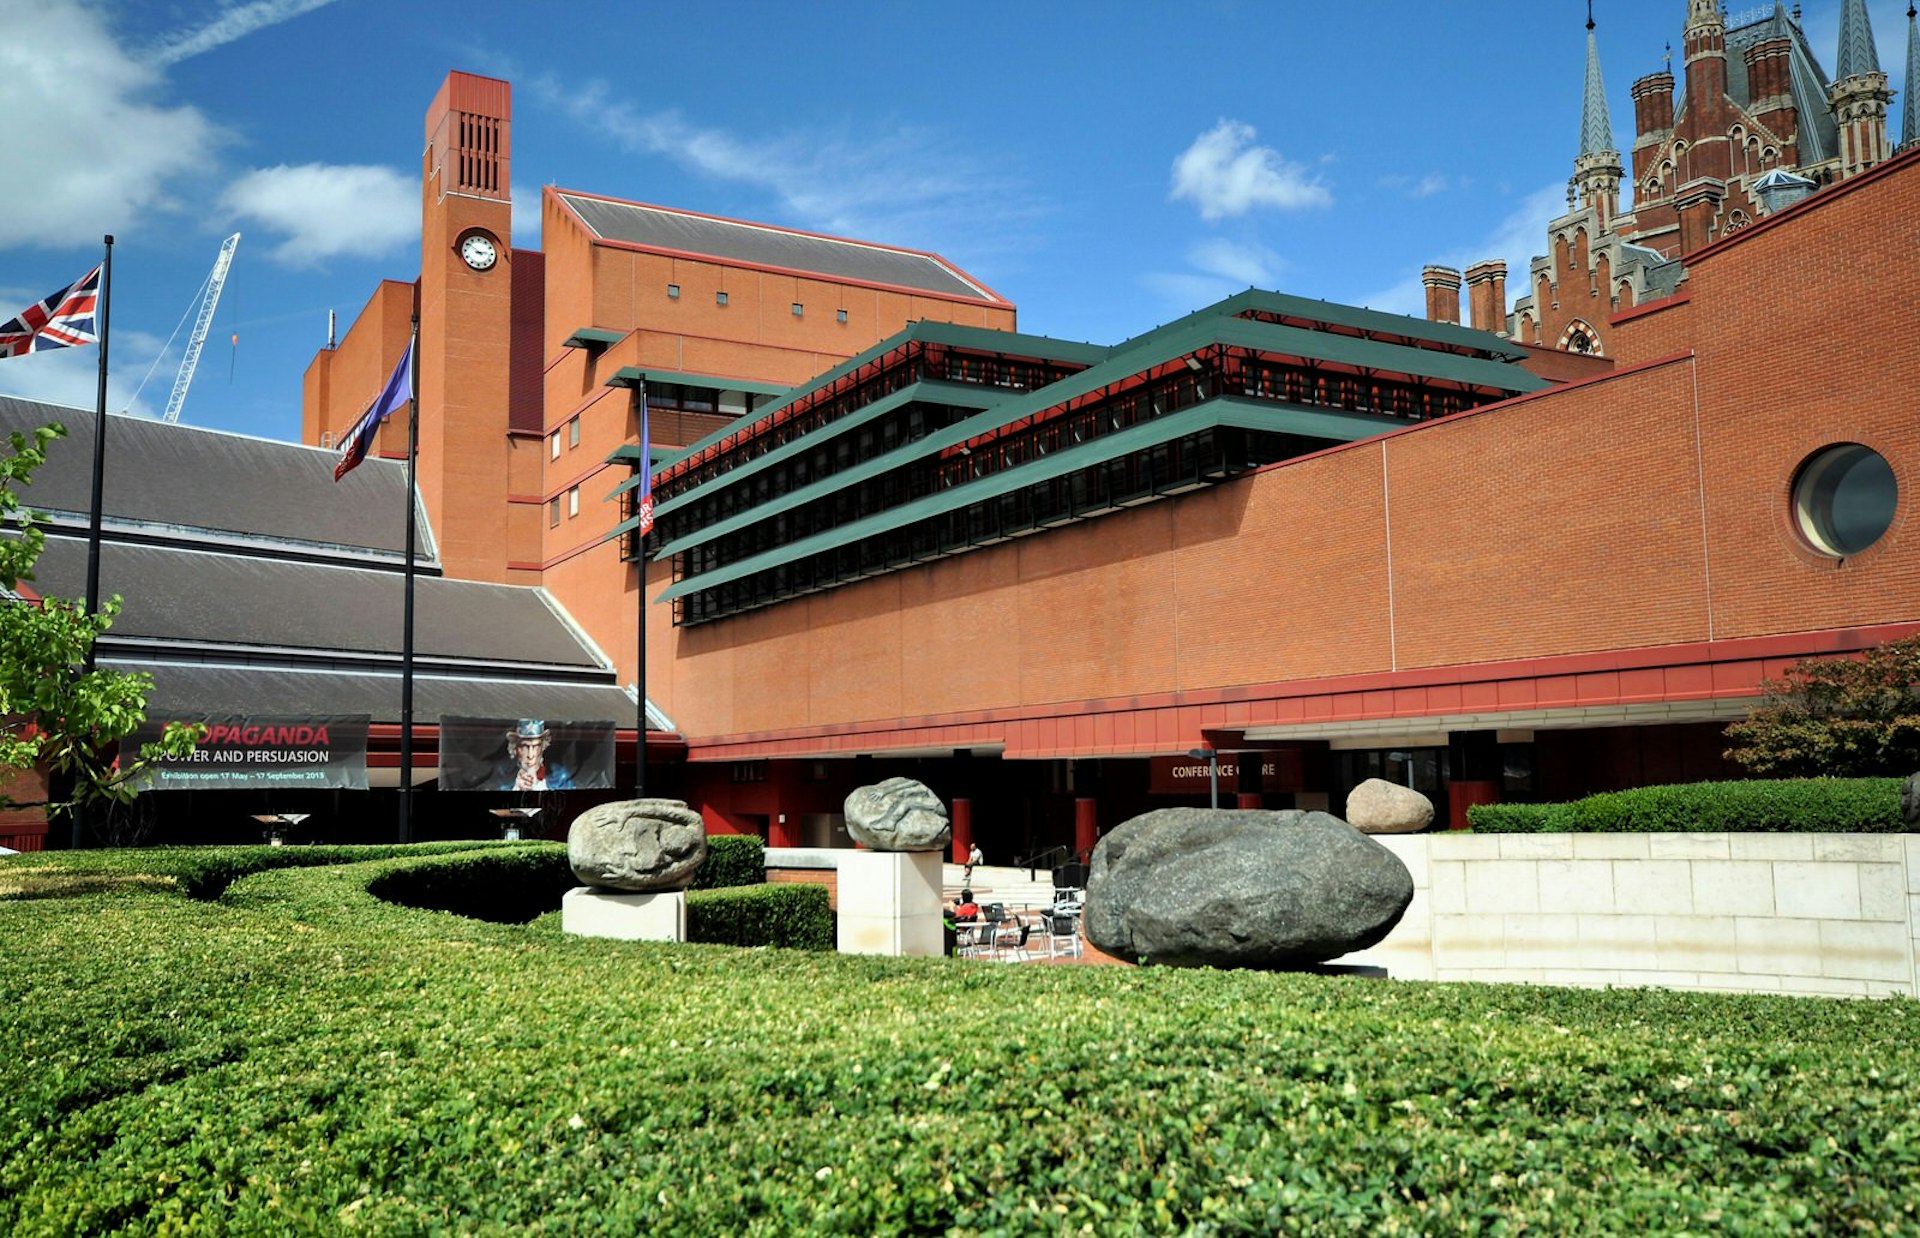 The exterior of the British Library